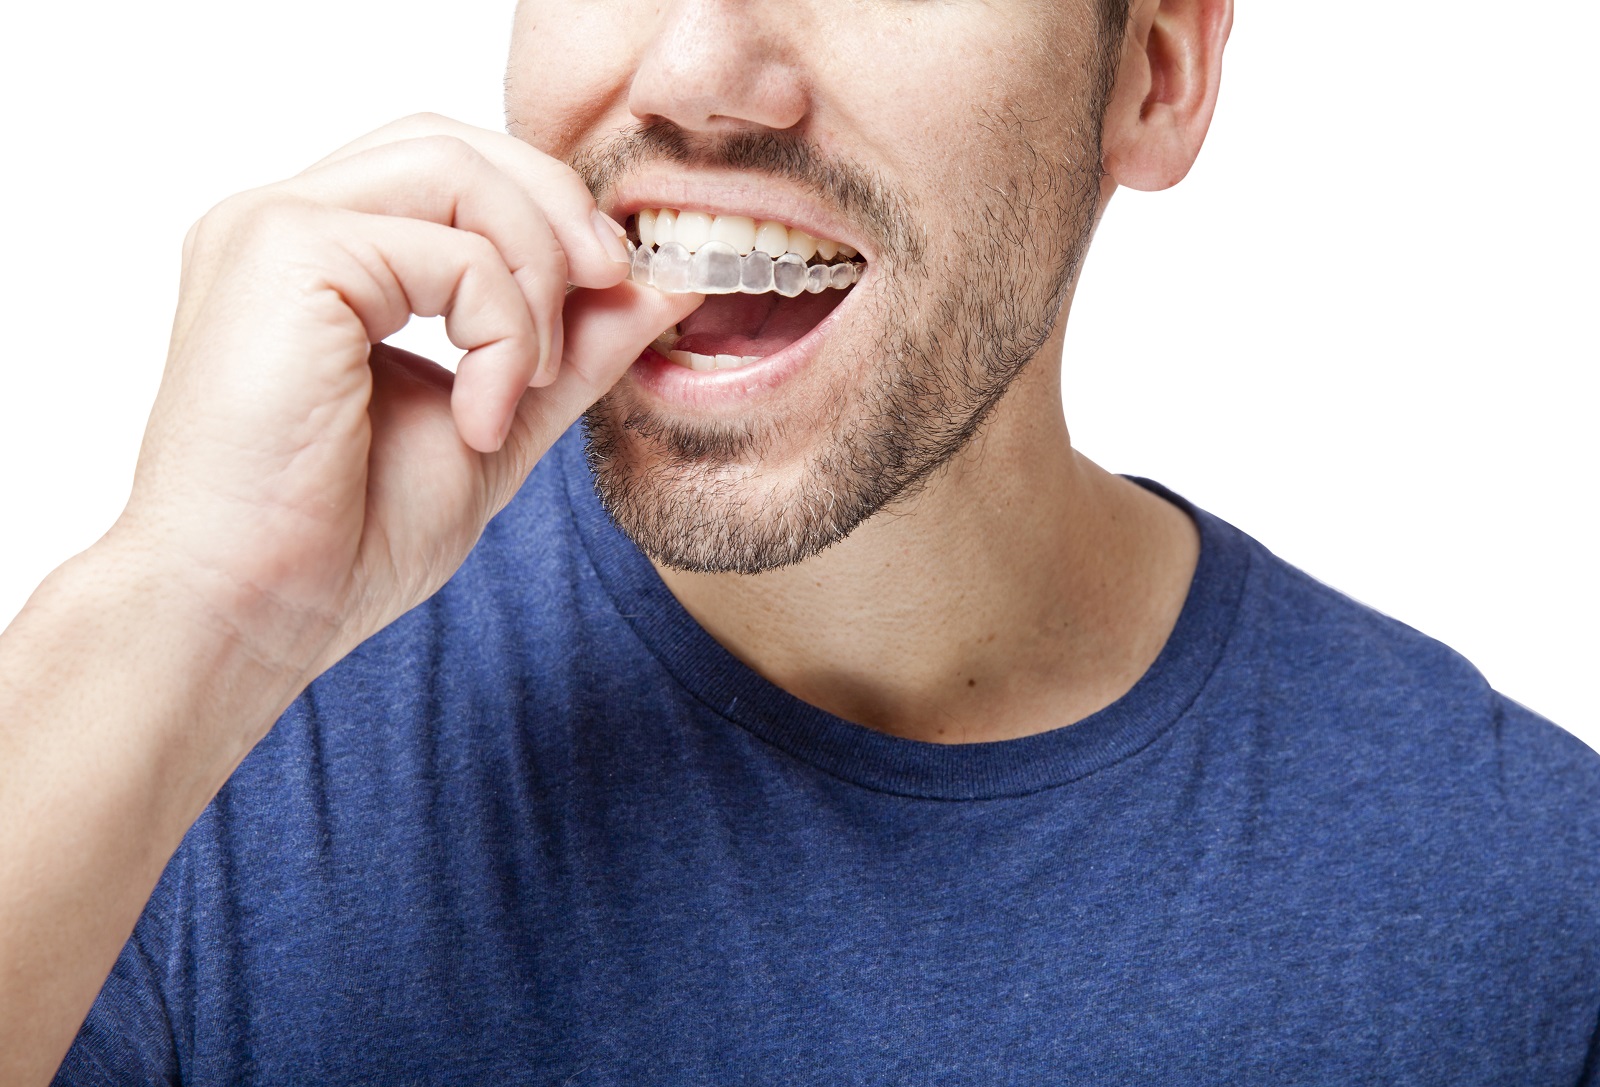 What Kinds Of Problems Can Invisalign Fix